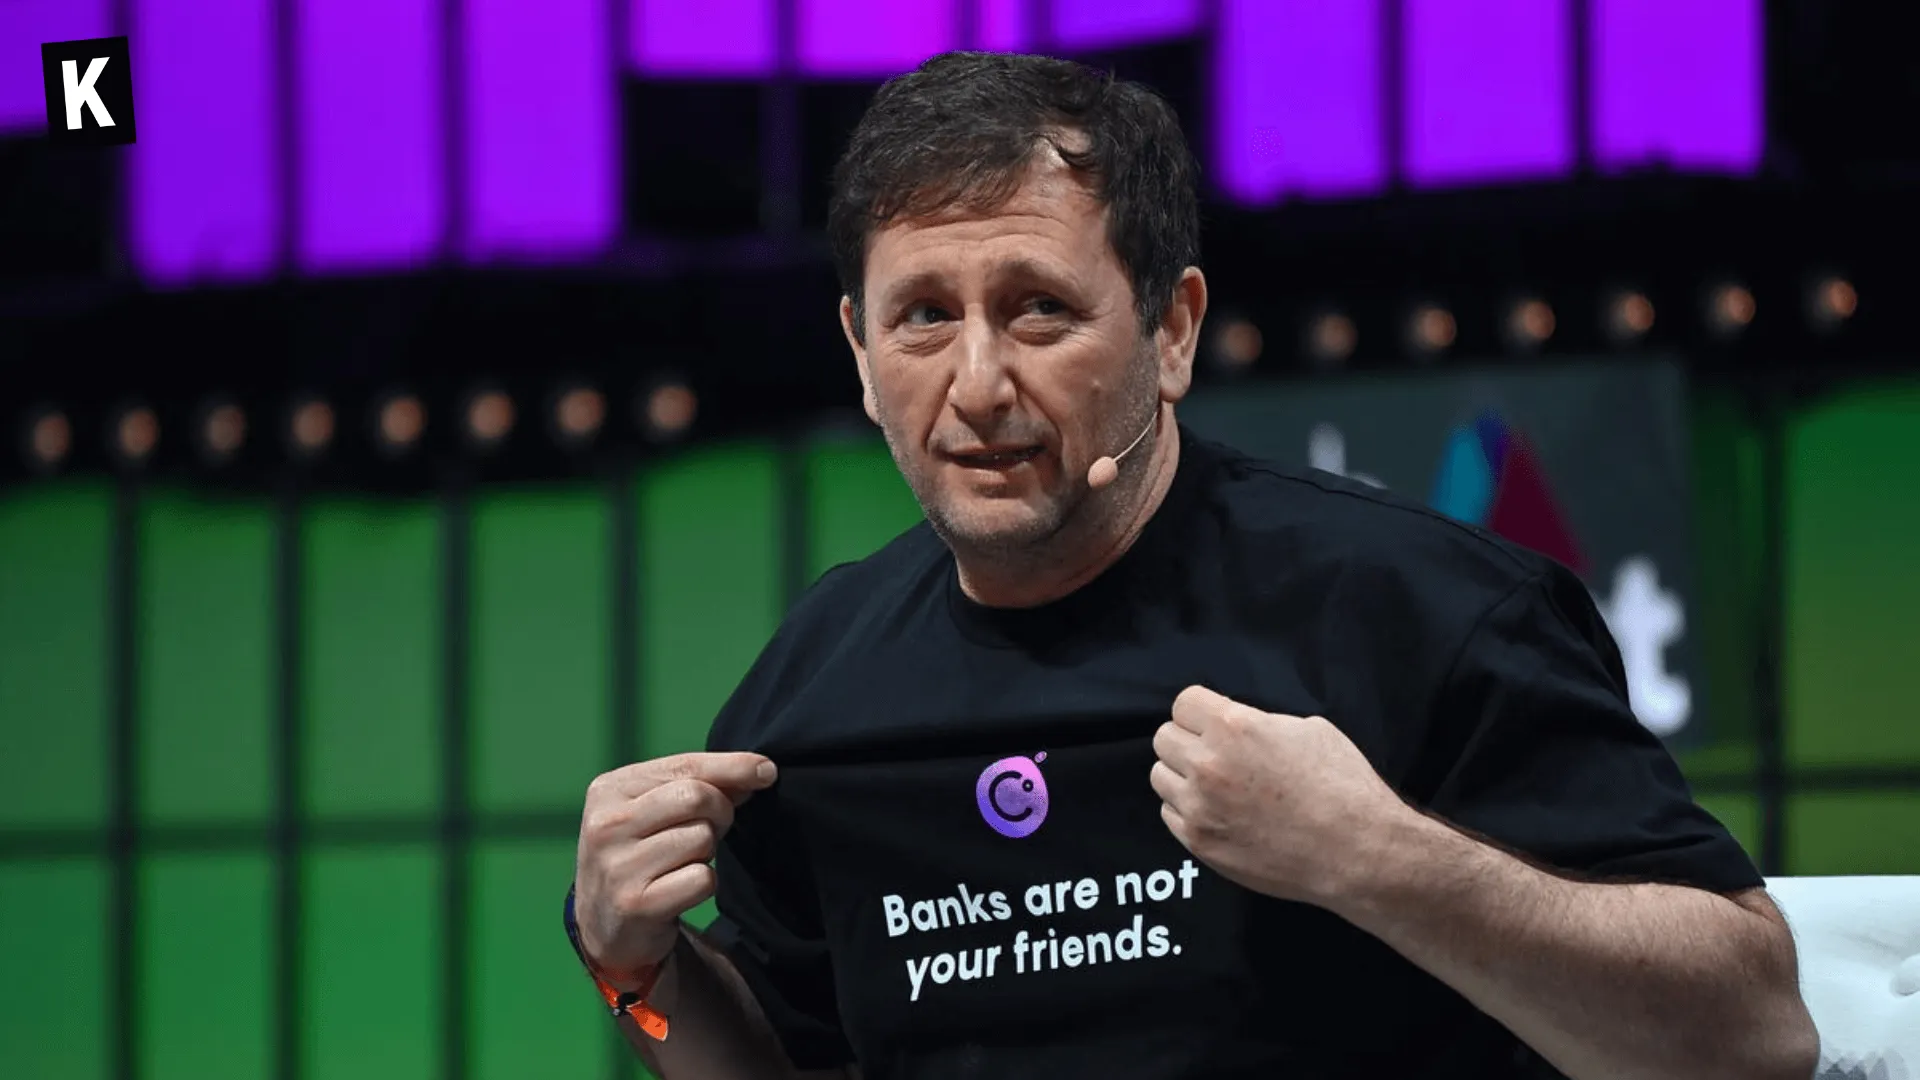 Alex Mashinsky wearing a t-shirt "Banks are not your friends" with a Celsius logo